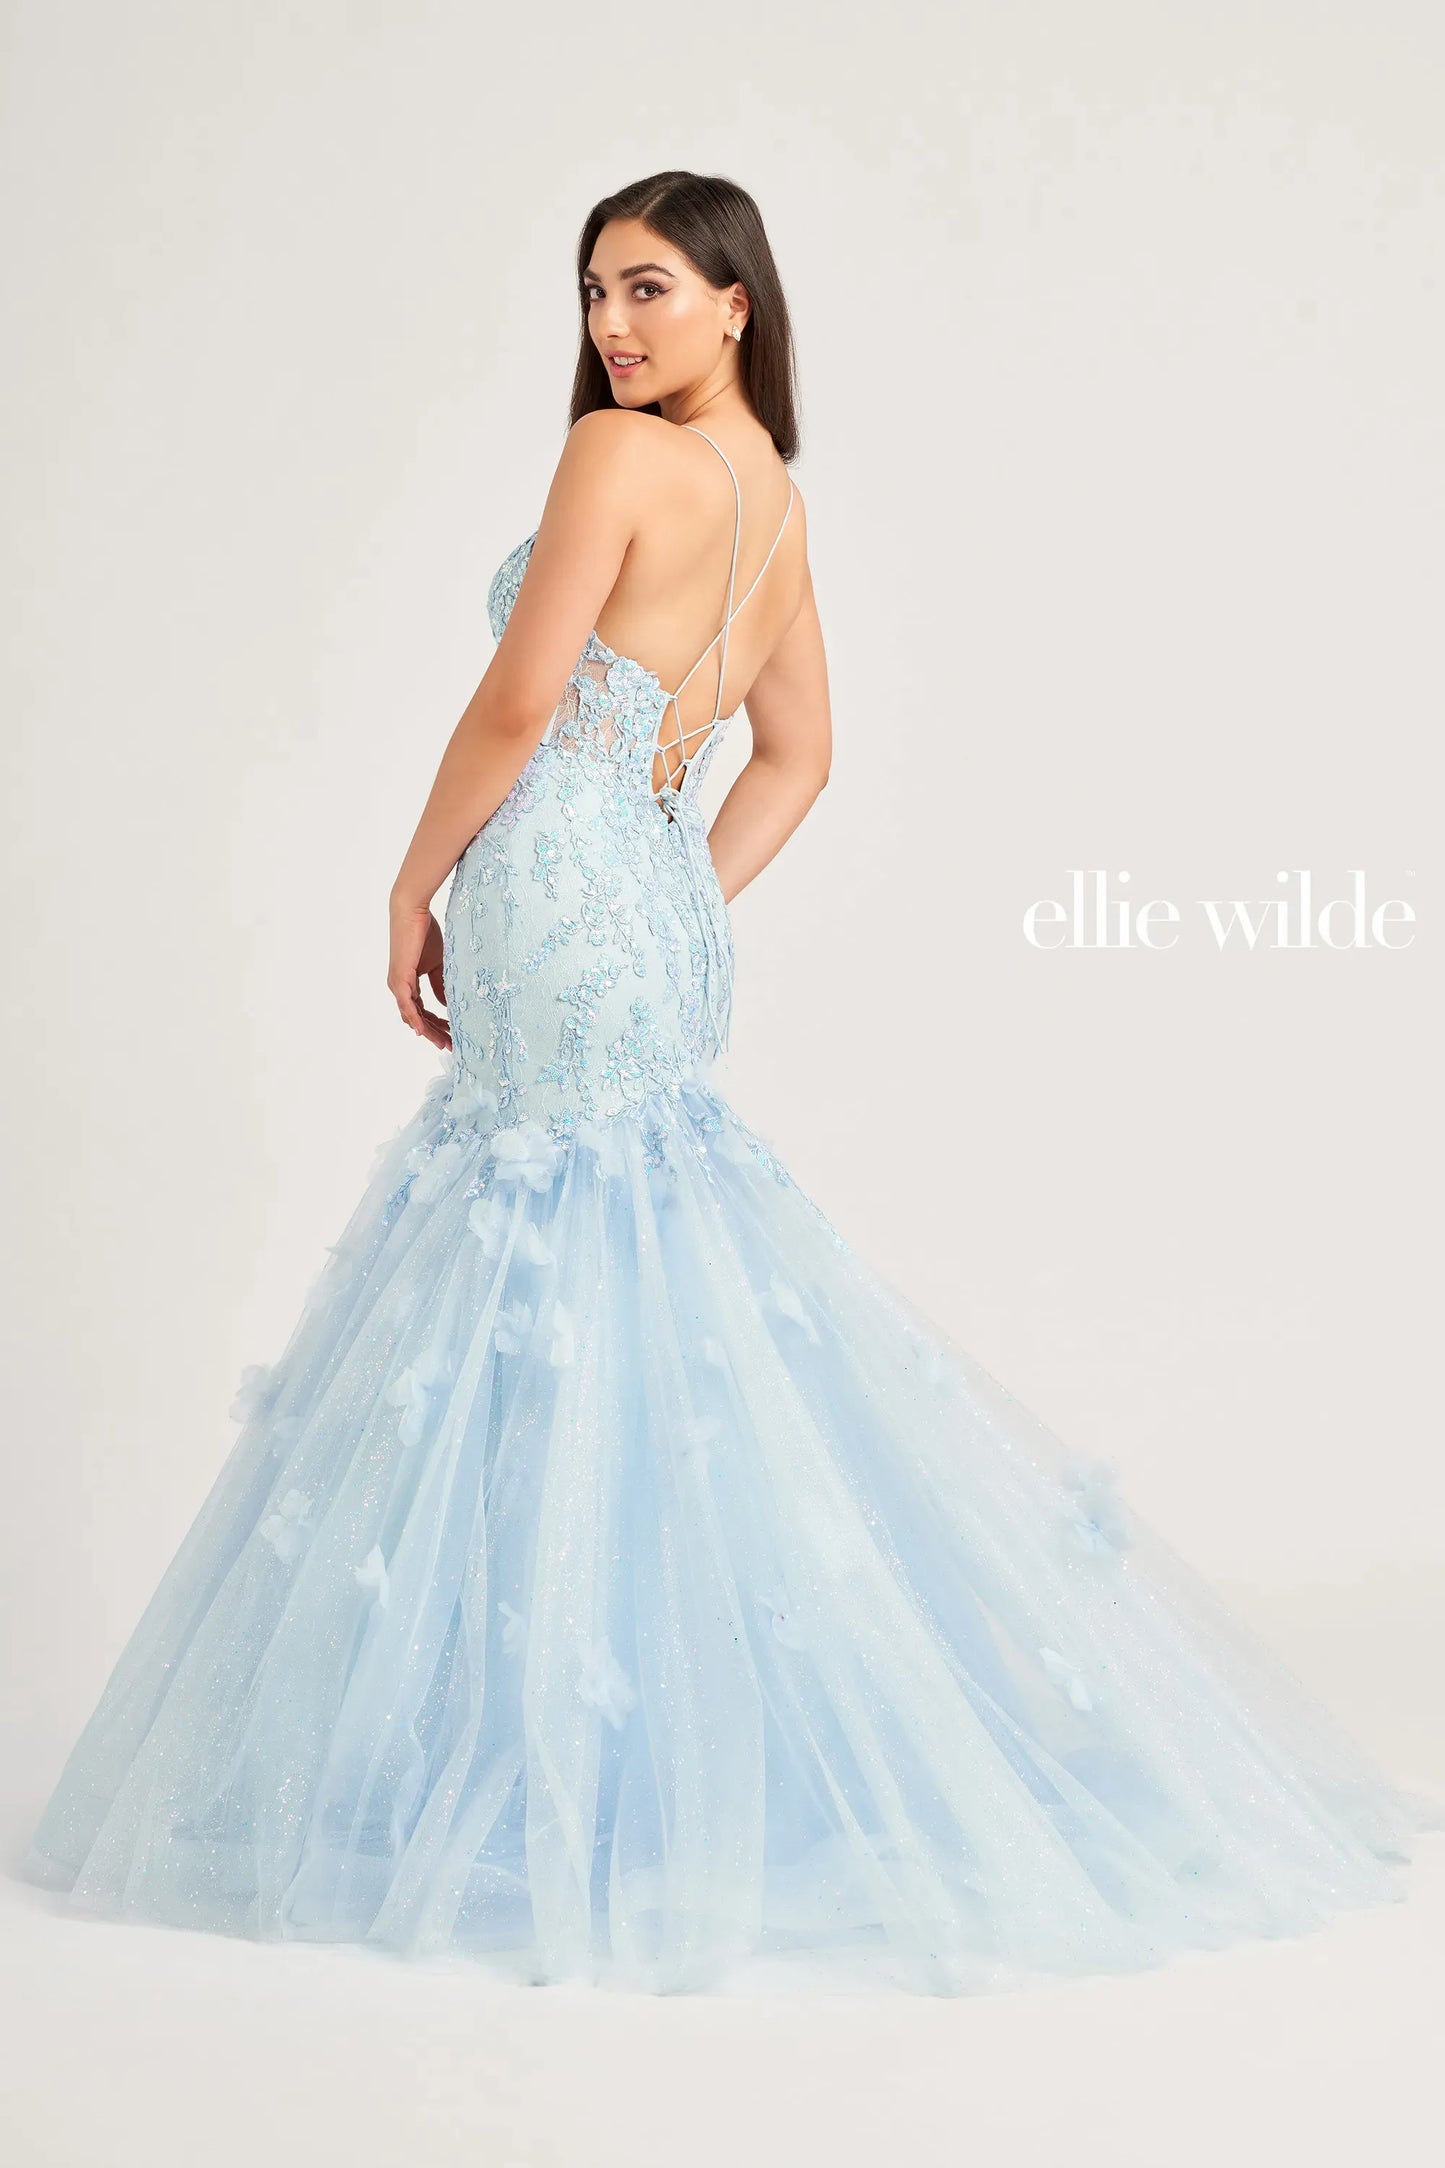 Expertly designed with a sheer lace corset and shimmering sequins, the Ellie Wilde EW35080 Prom Dress exudes elegance and sophistication. The mermaid silhouette accentuates curves, making you feel confident and glamorous. Perfect for prom or any formal occasion, this gown is sure to make a statement.  Sizes: 00-16  Colors: Light Blue, Hot Pink, Orange